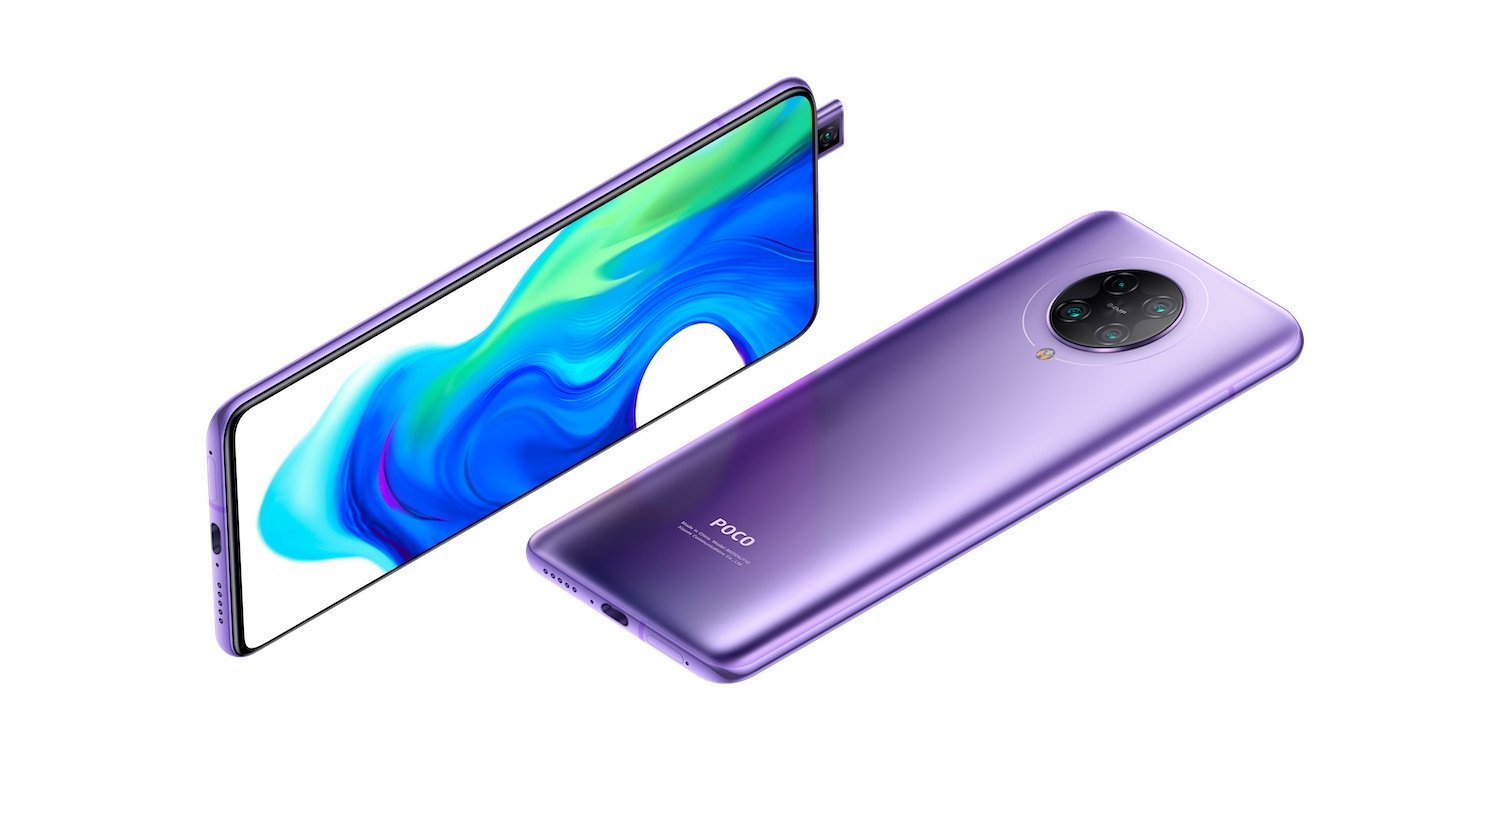 [Updated] Poco F2 Pro MIUI 12 update coming later this month, confirms company executive